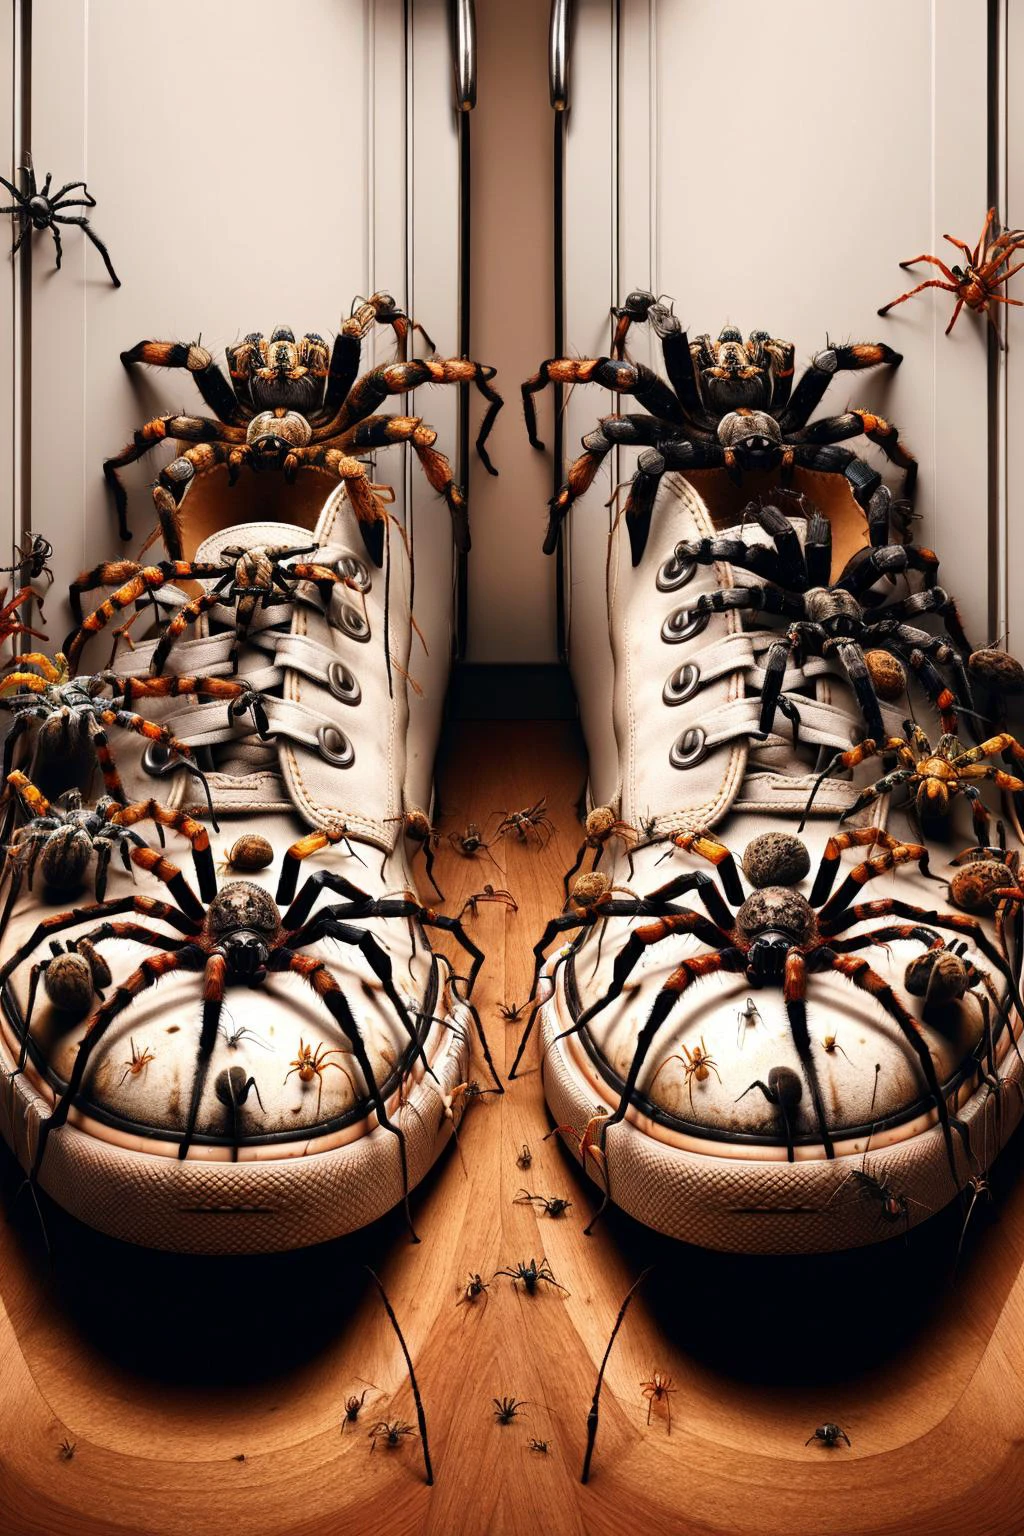 Ais-spiderz on a pair of shoes, in a messy closet 